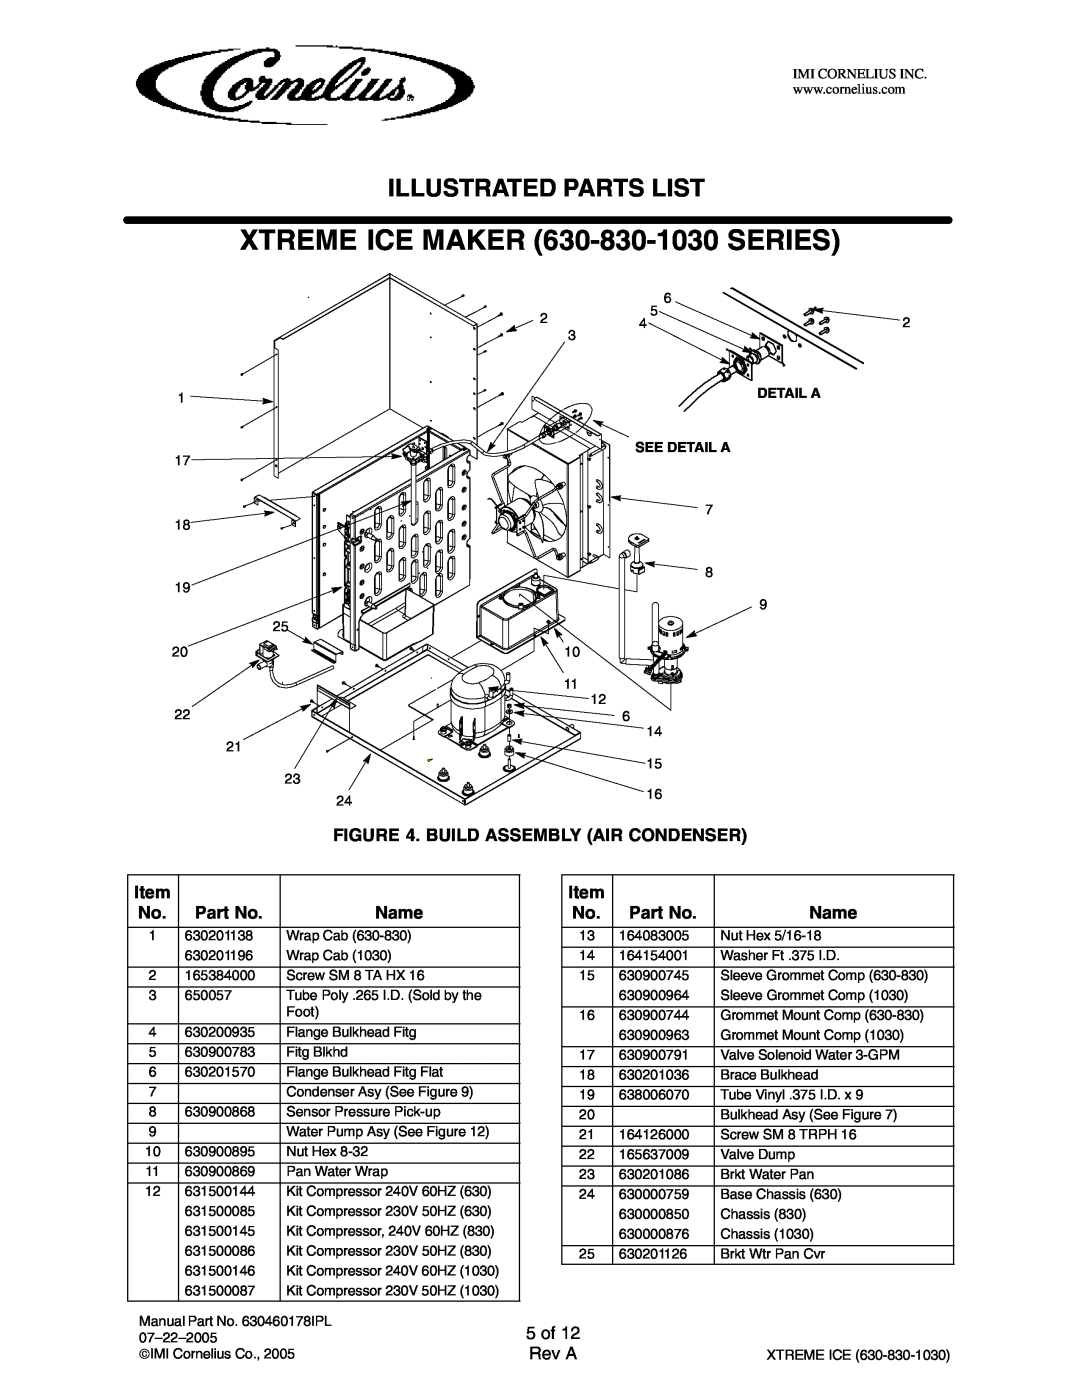 Cornelius 631808004 manual 5 of, XTREME ICE MAKER 630-830-1030SERIES, Illustrated Parts List, Rev A, Detail A See Detail A 